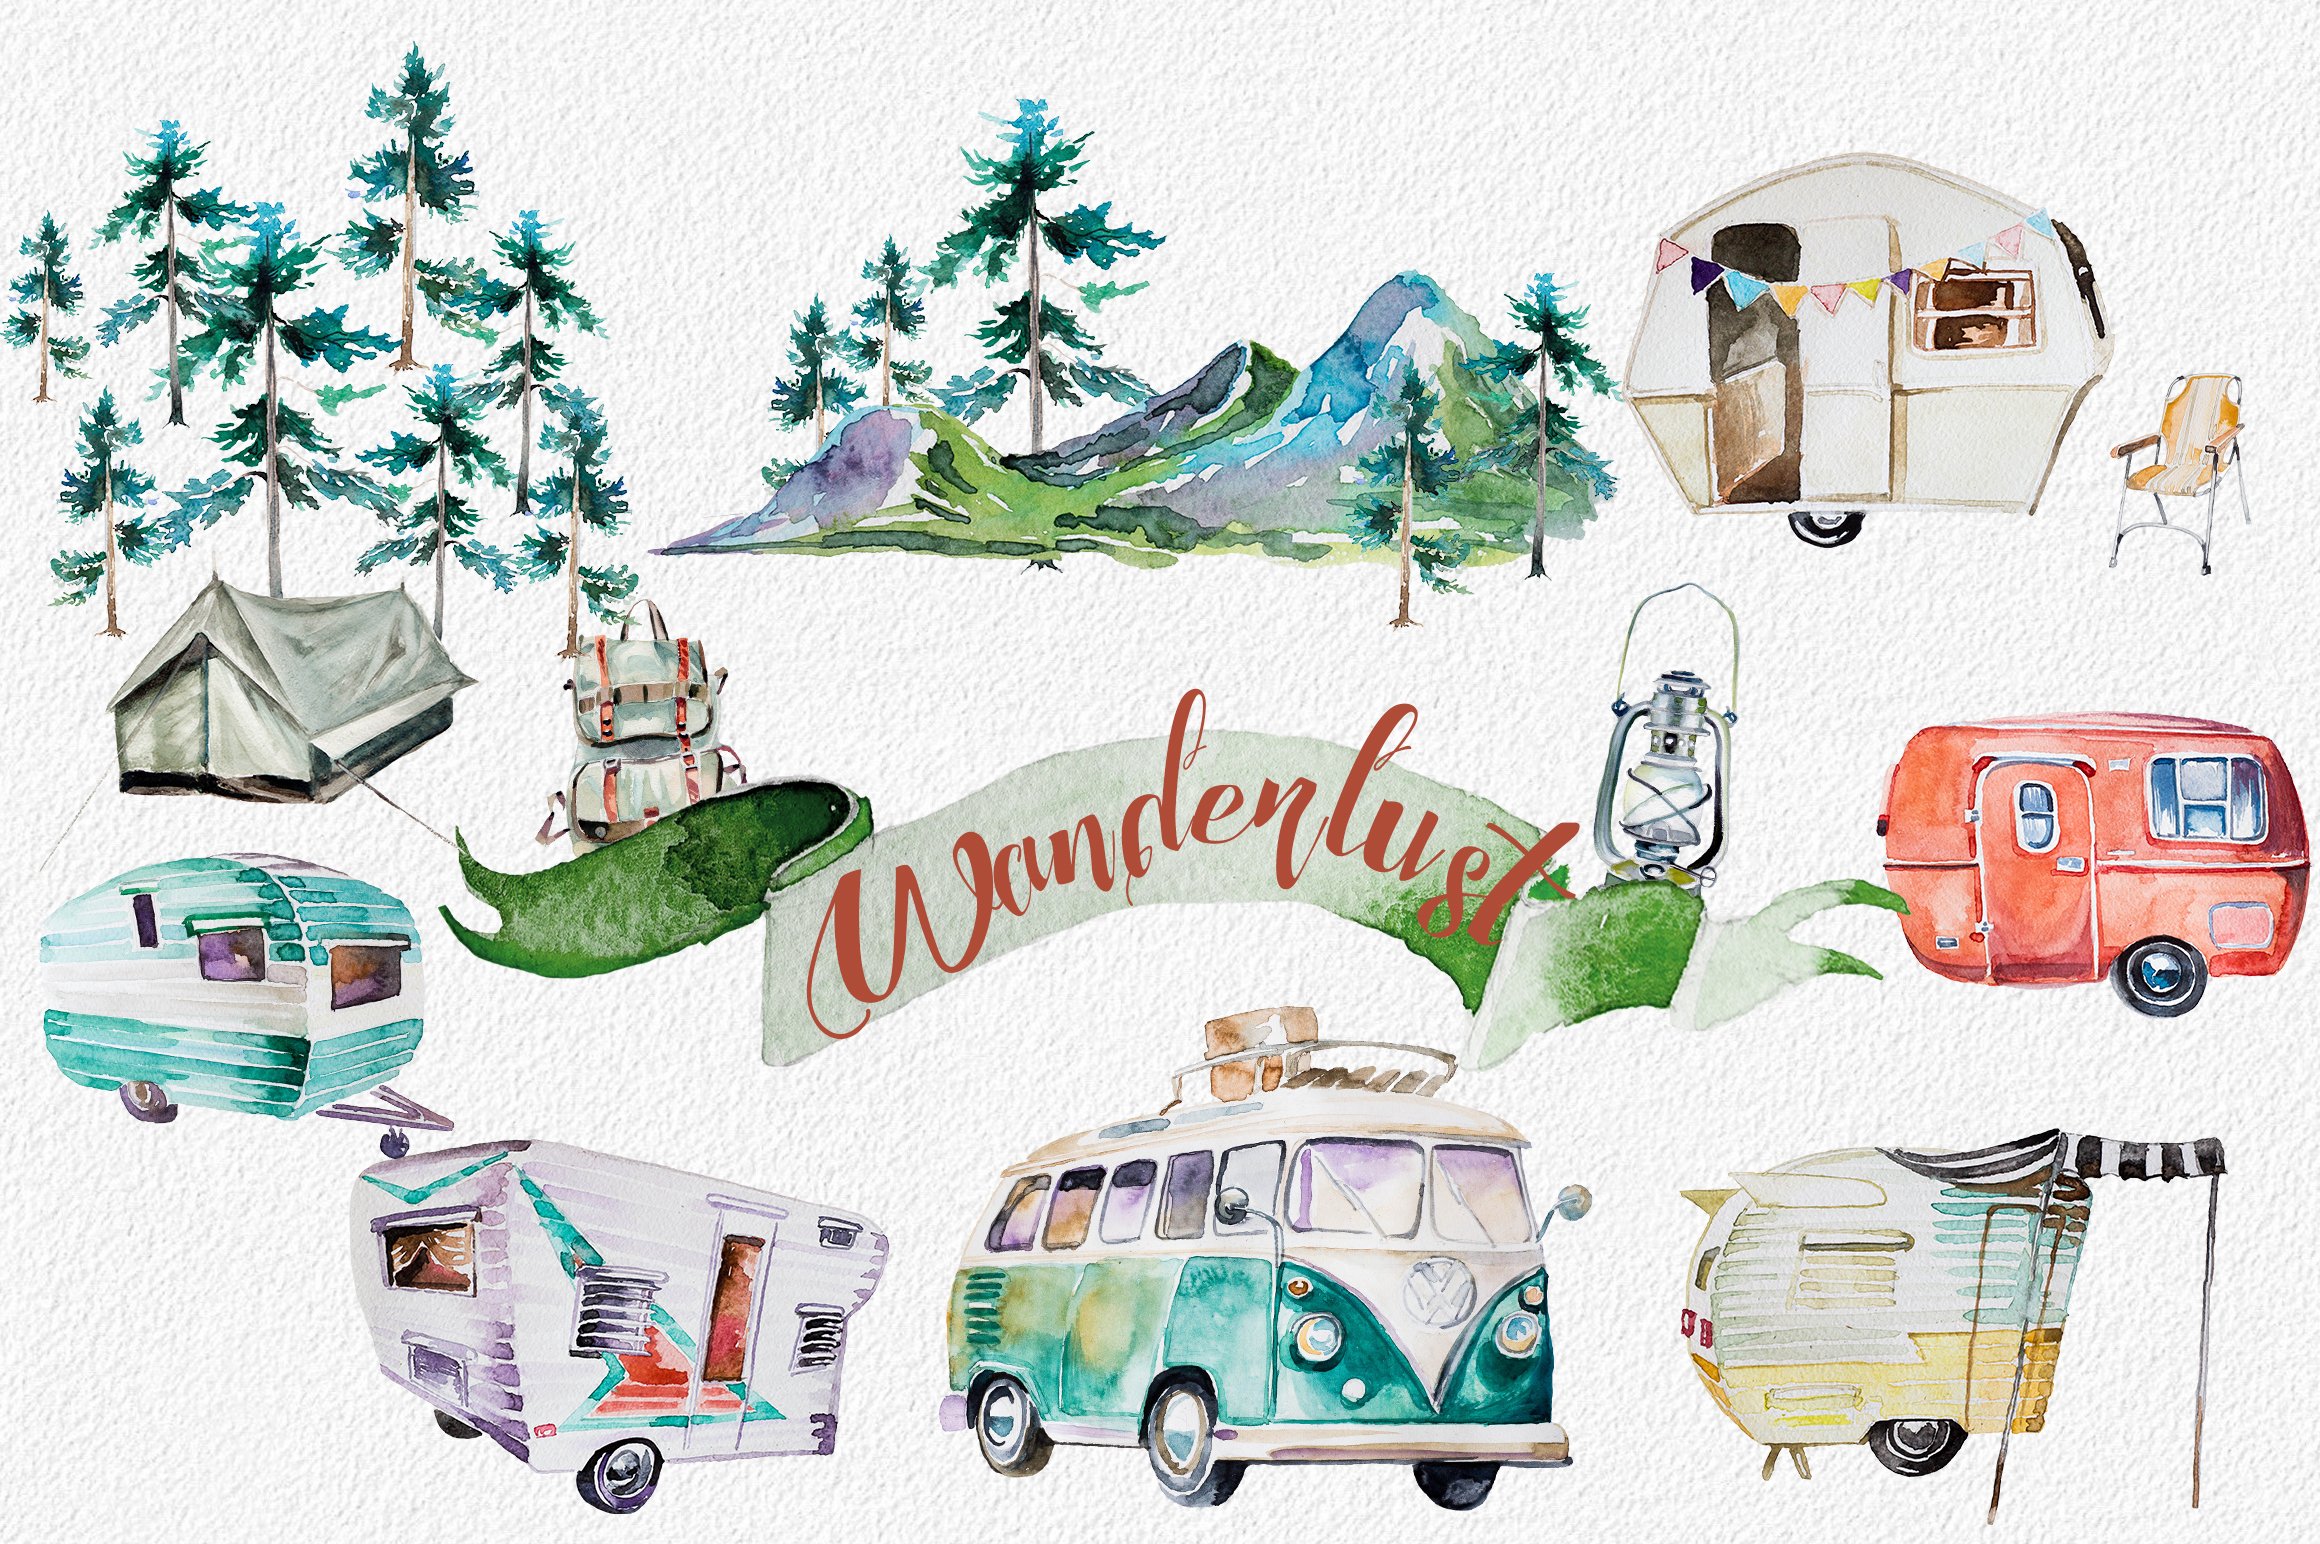 Cool watercolor elements for camping illustration.